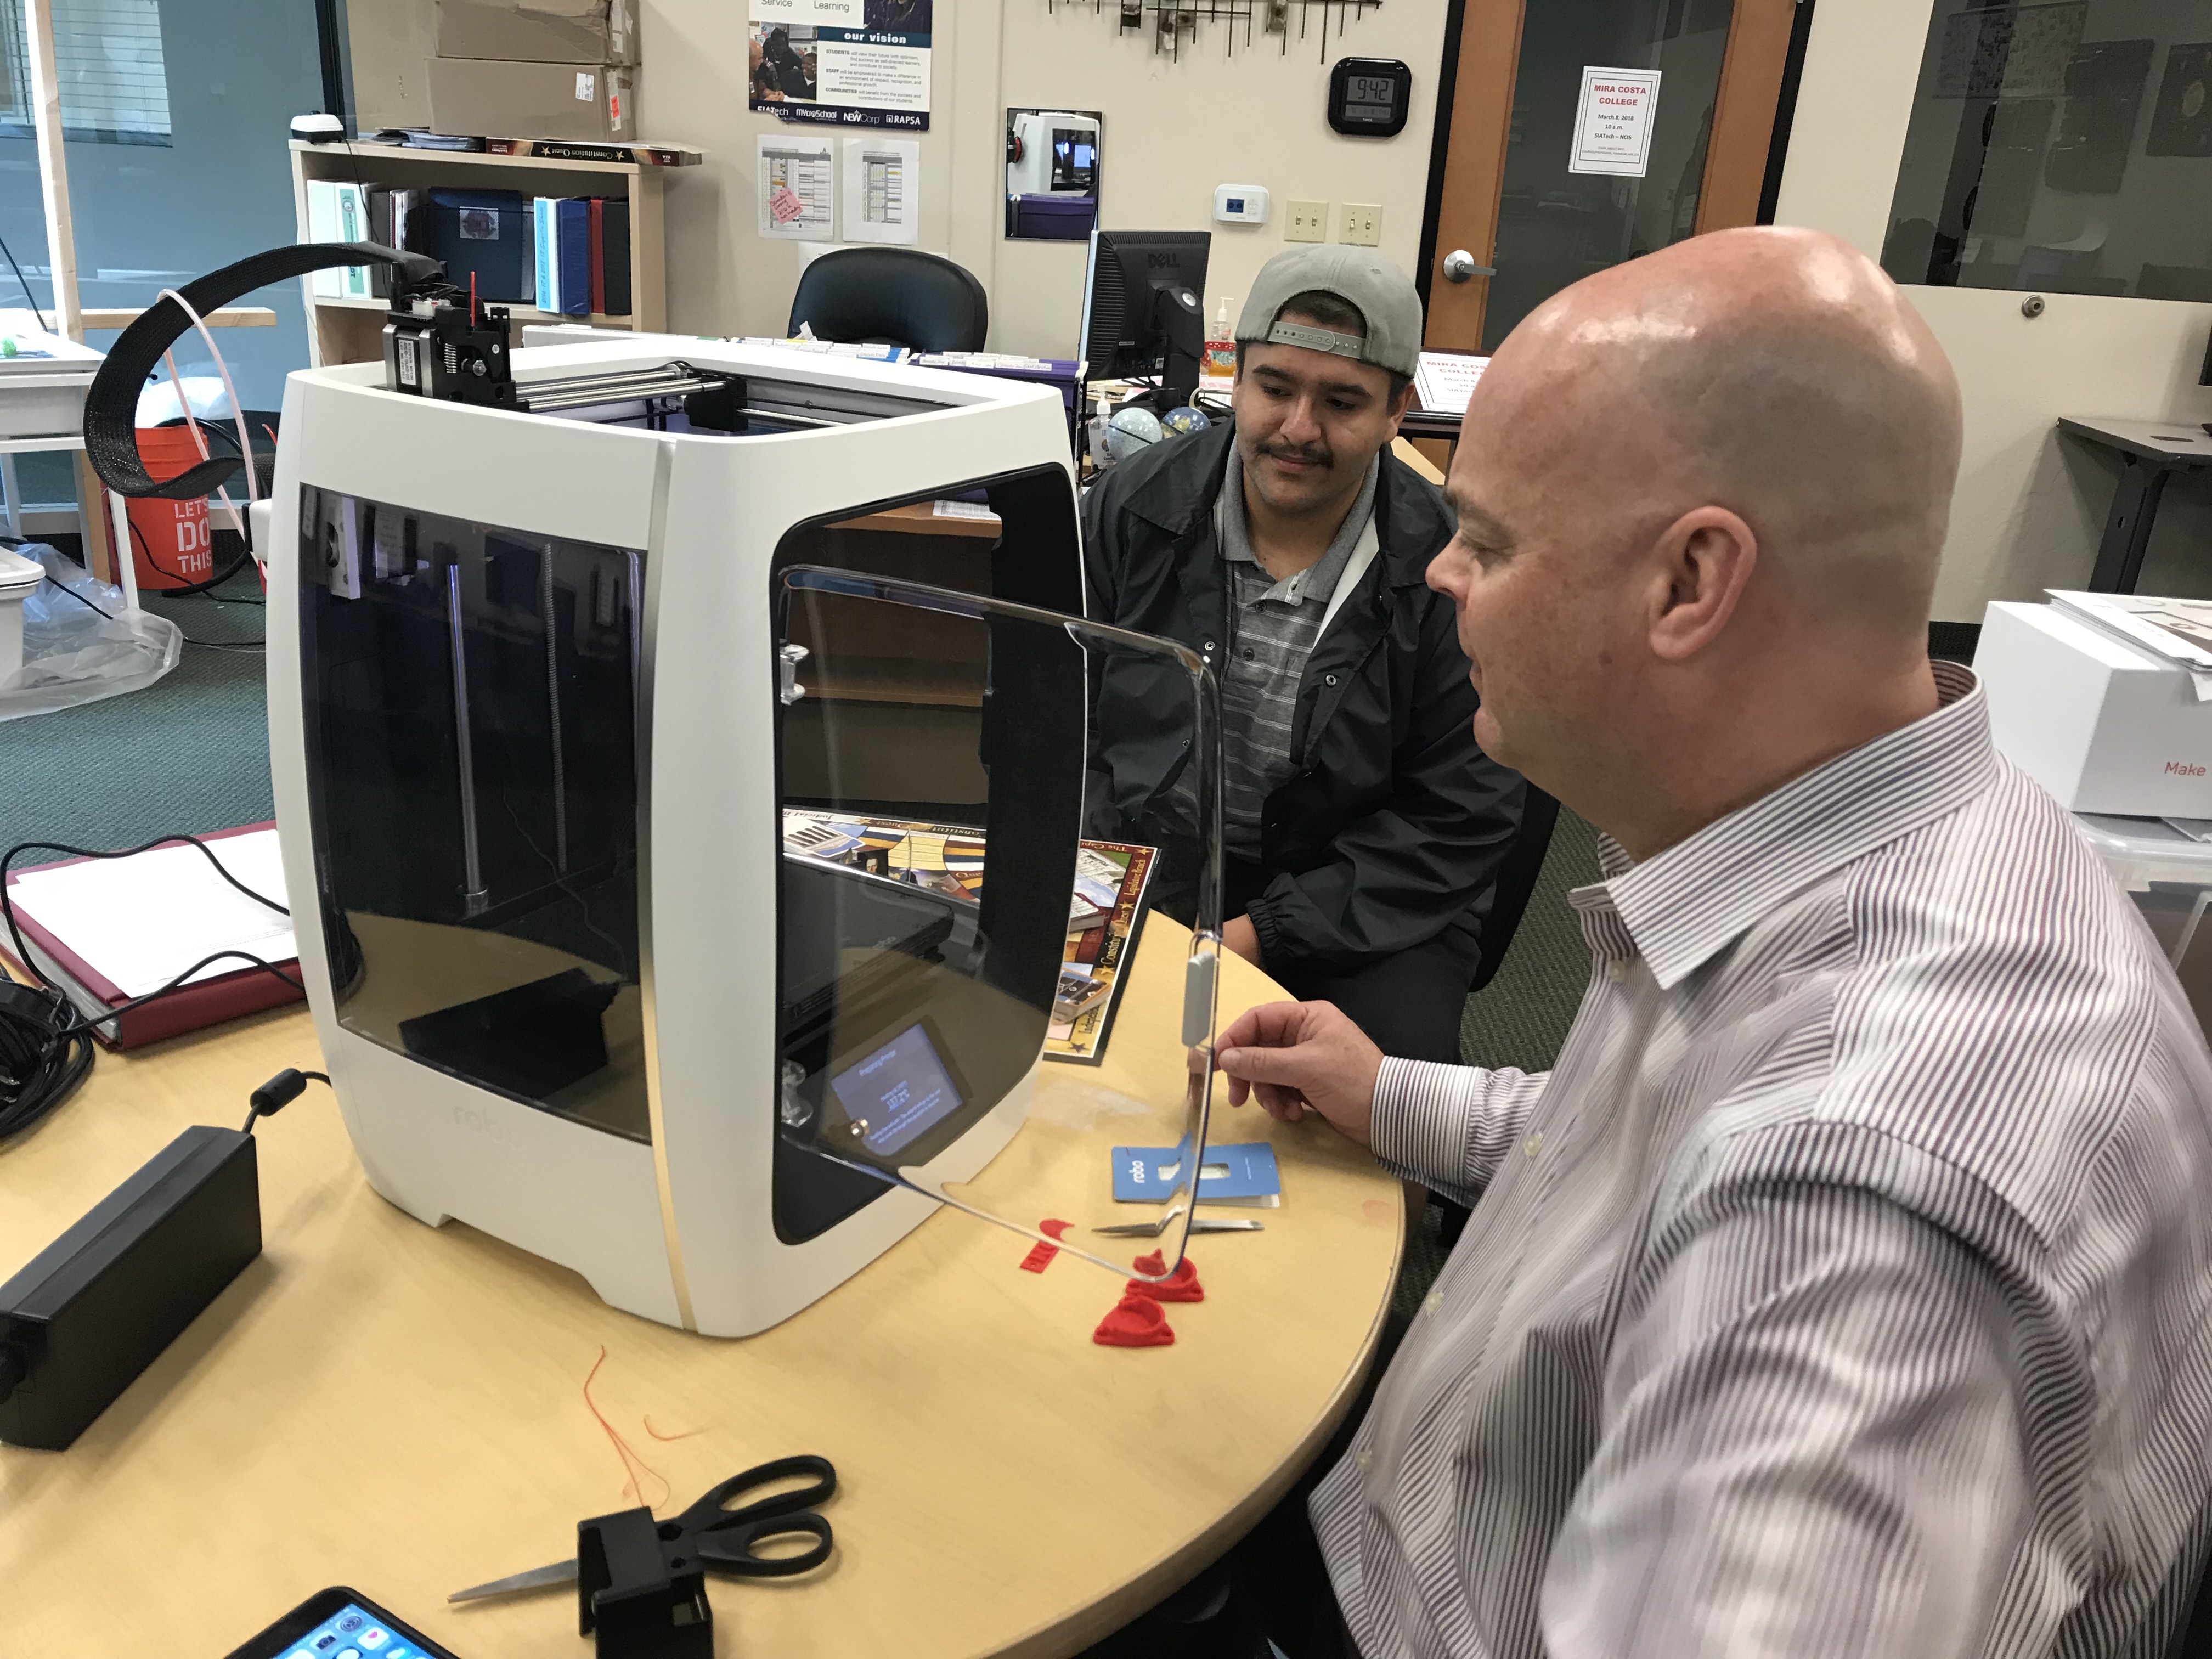 SIATech North County Independent Study Charter High School in Oceanside 3-D Printer